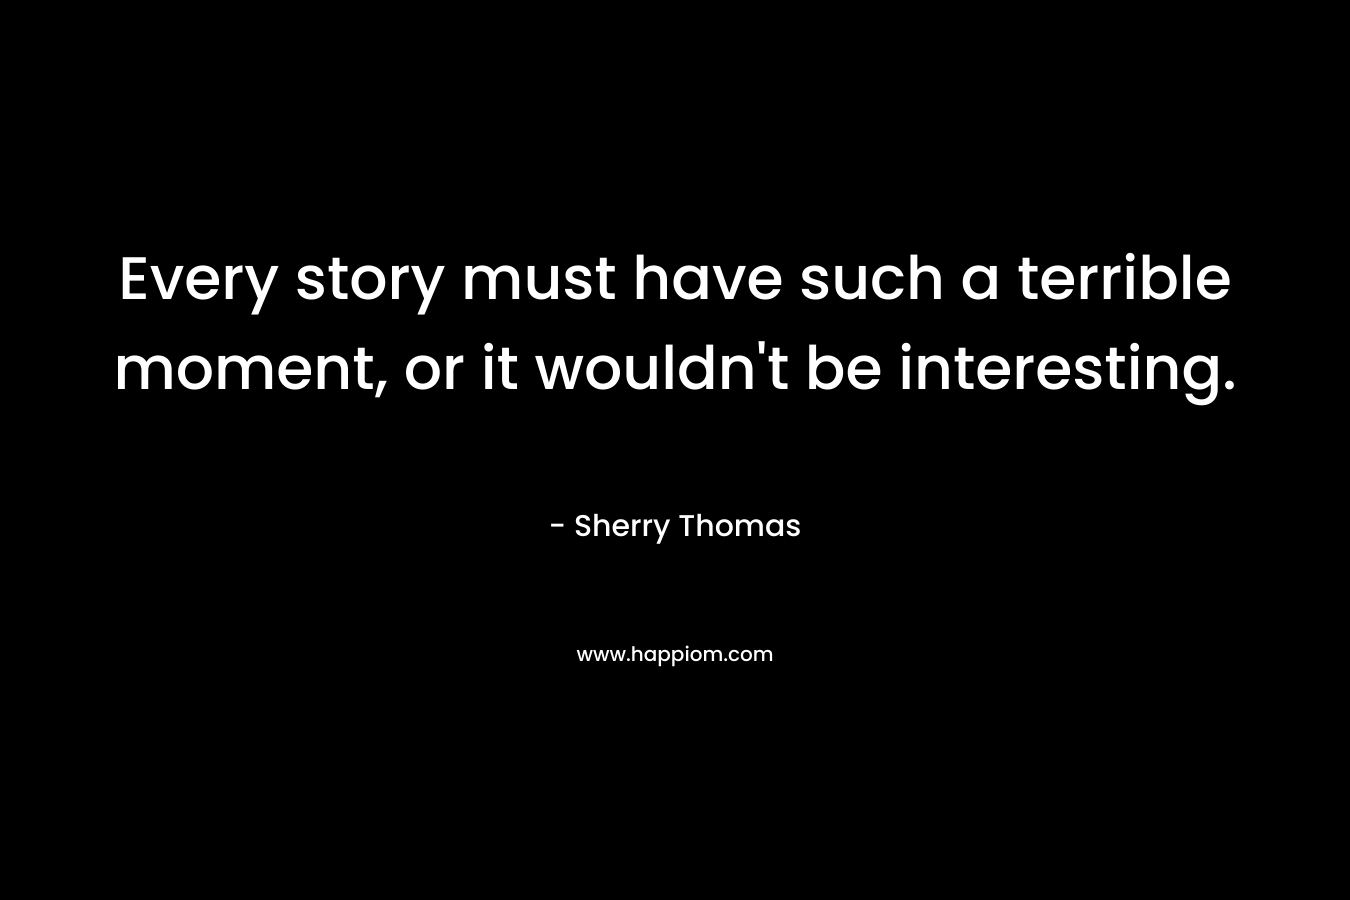 Every story must have such a terrible moment, or it wouldn't be interesting.